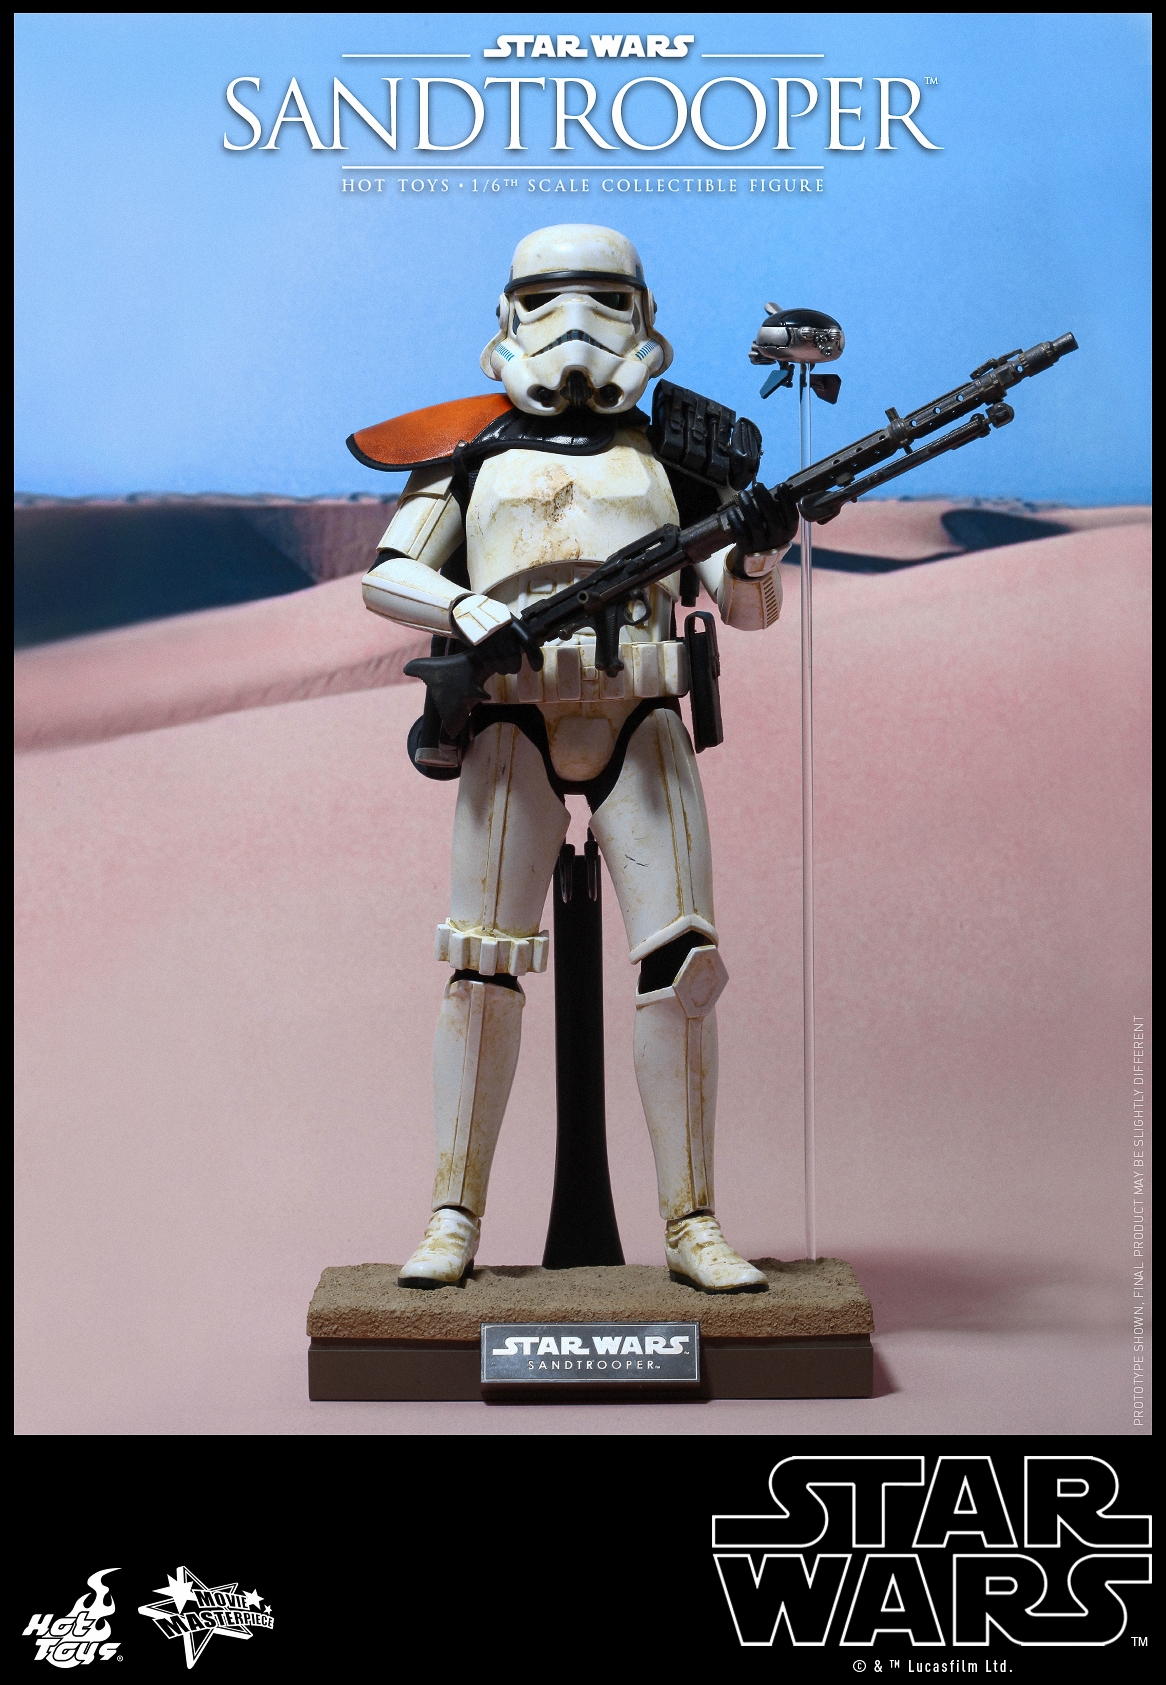 Hot-Toys-MMS295-Sandtrooper-Collectible-Figure-009.jpg